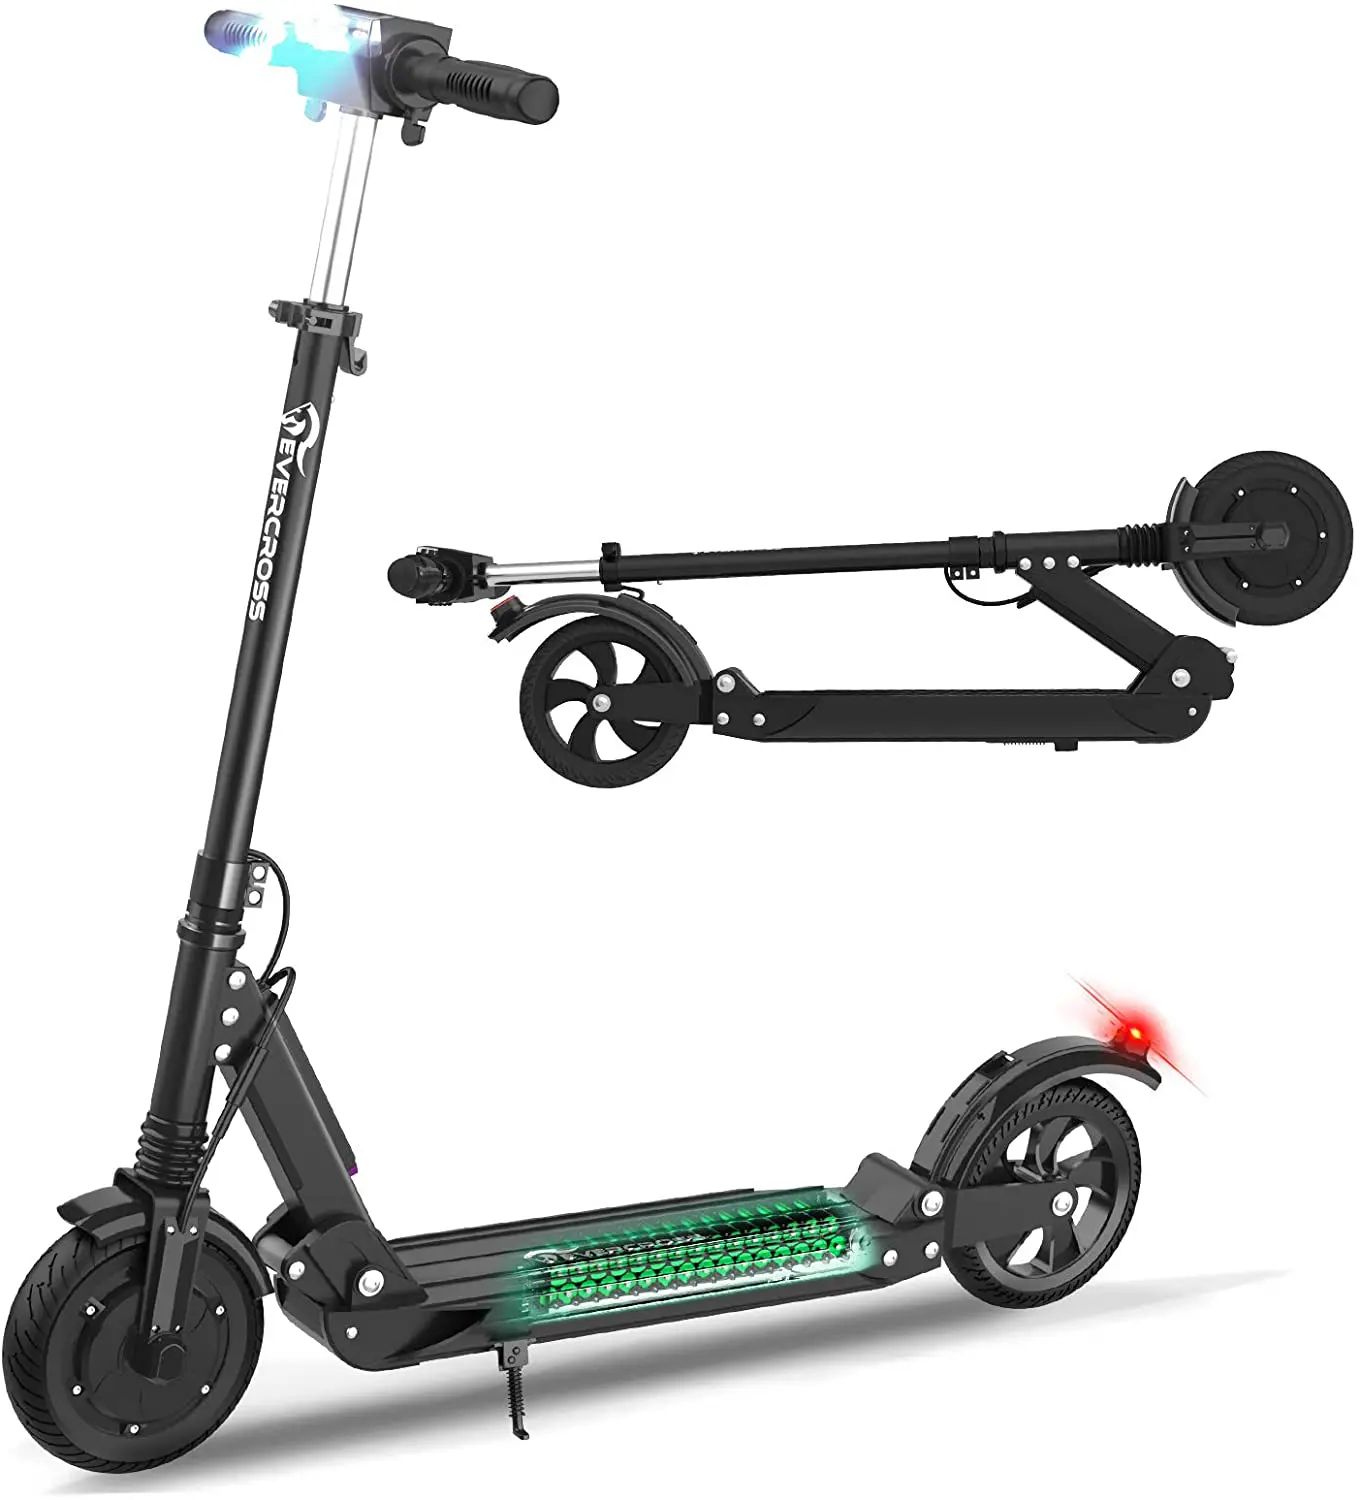 Best Electric Scooter under 400 in 2021 with Buying Guide